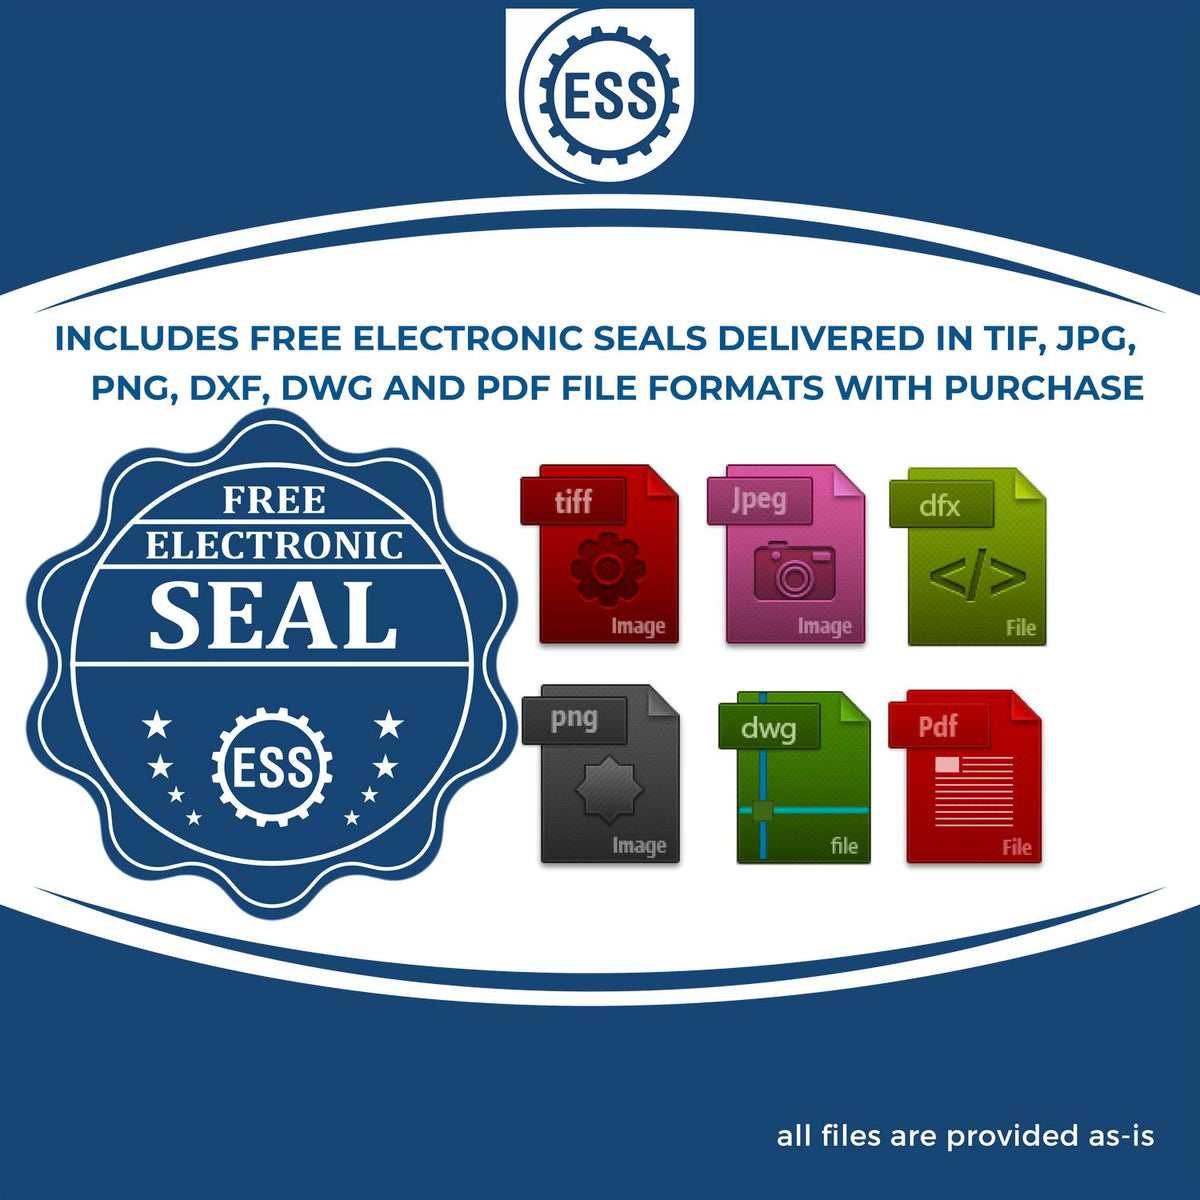 An infographic for the free electronic seal for the Slim Pre-Inked New York Professional Engineer Seal Stamp illustrating the different file type icons such as DXF, DWG, TIF, JPG and PNG.